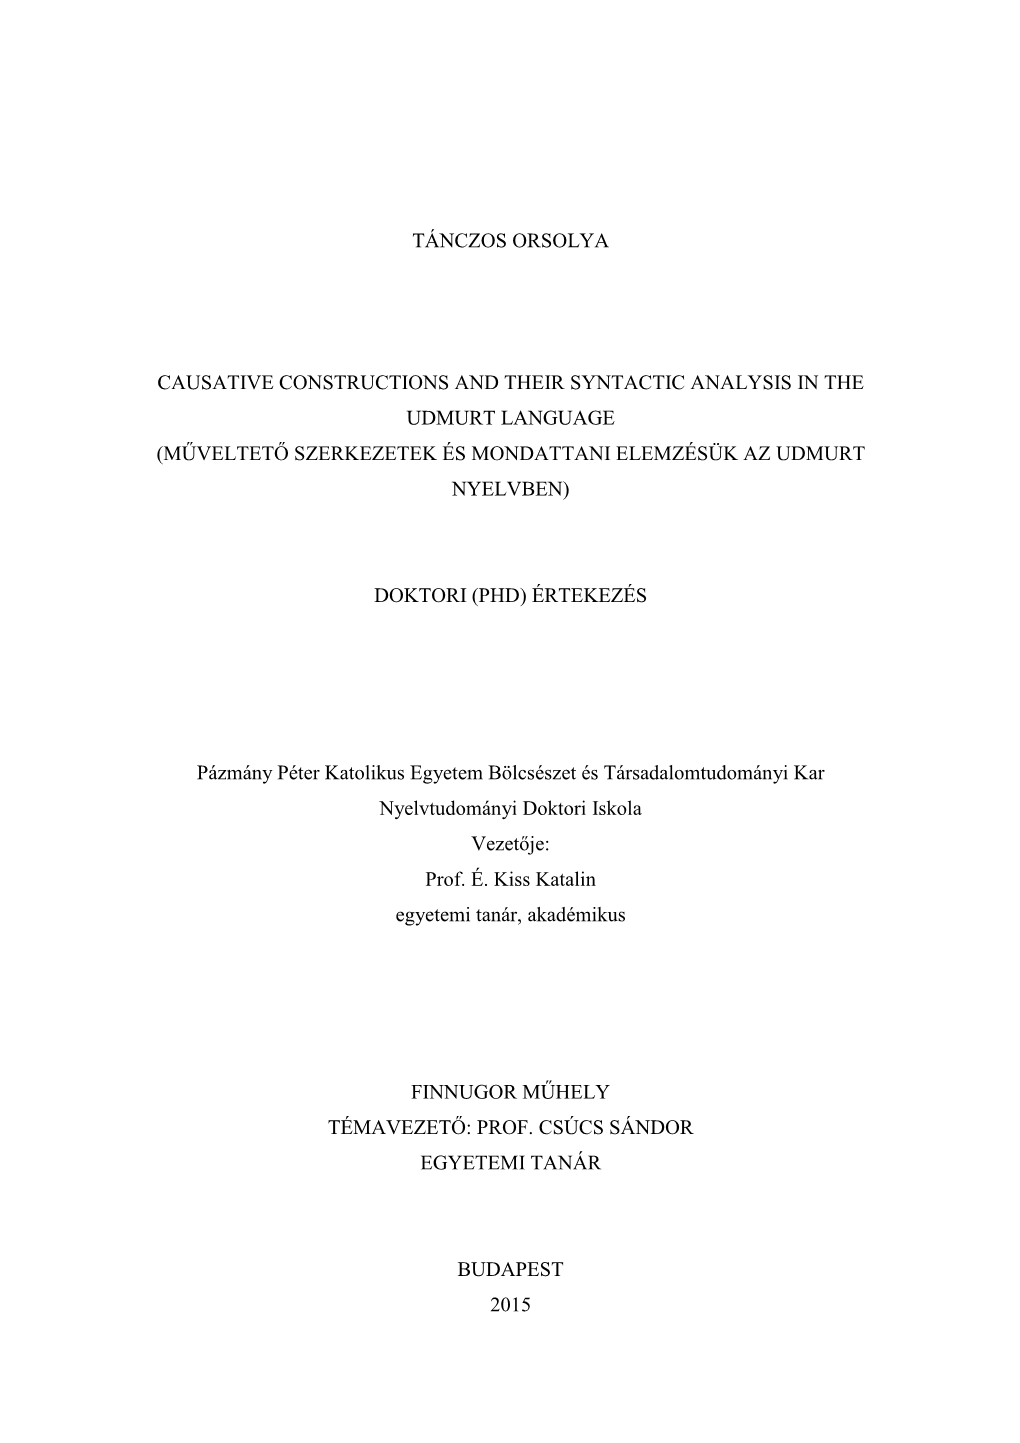 Tánczos Orsolya Causative Constructions and Their